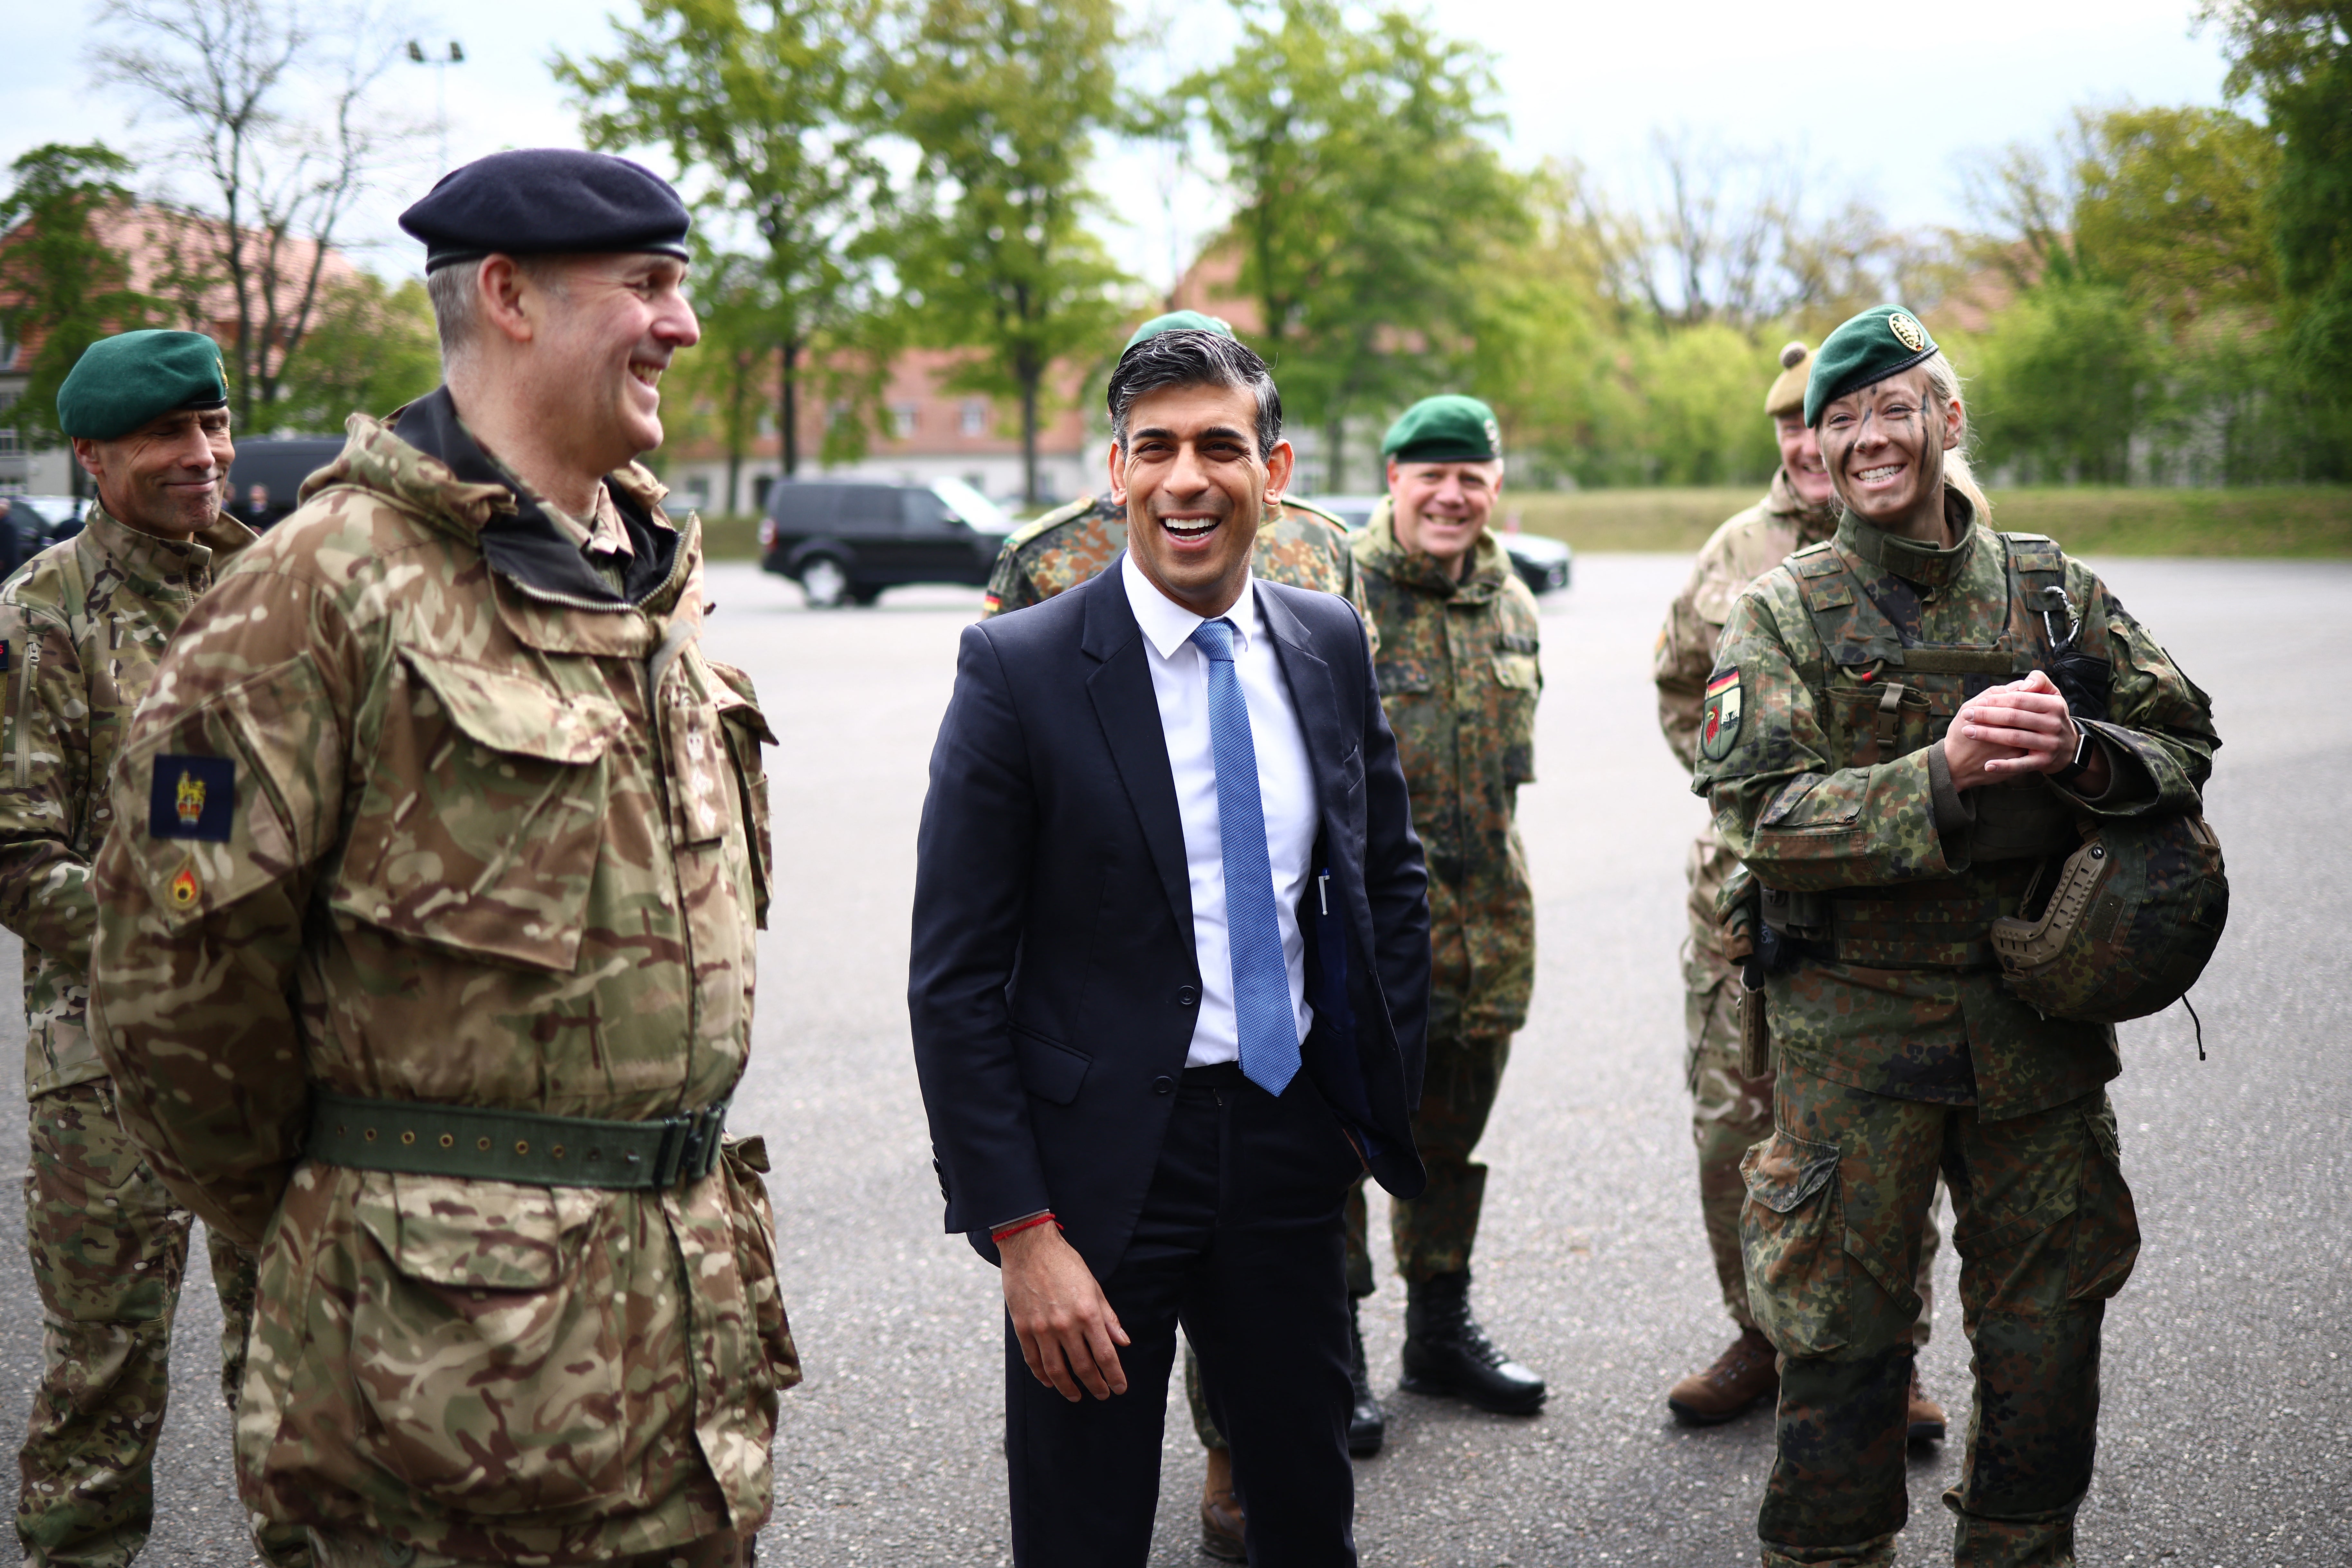 Rishi Sunak speaks with military personnel as he visits the Julius Leber Barracks in Berlin on Wednesday